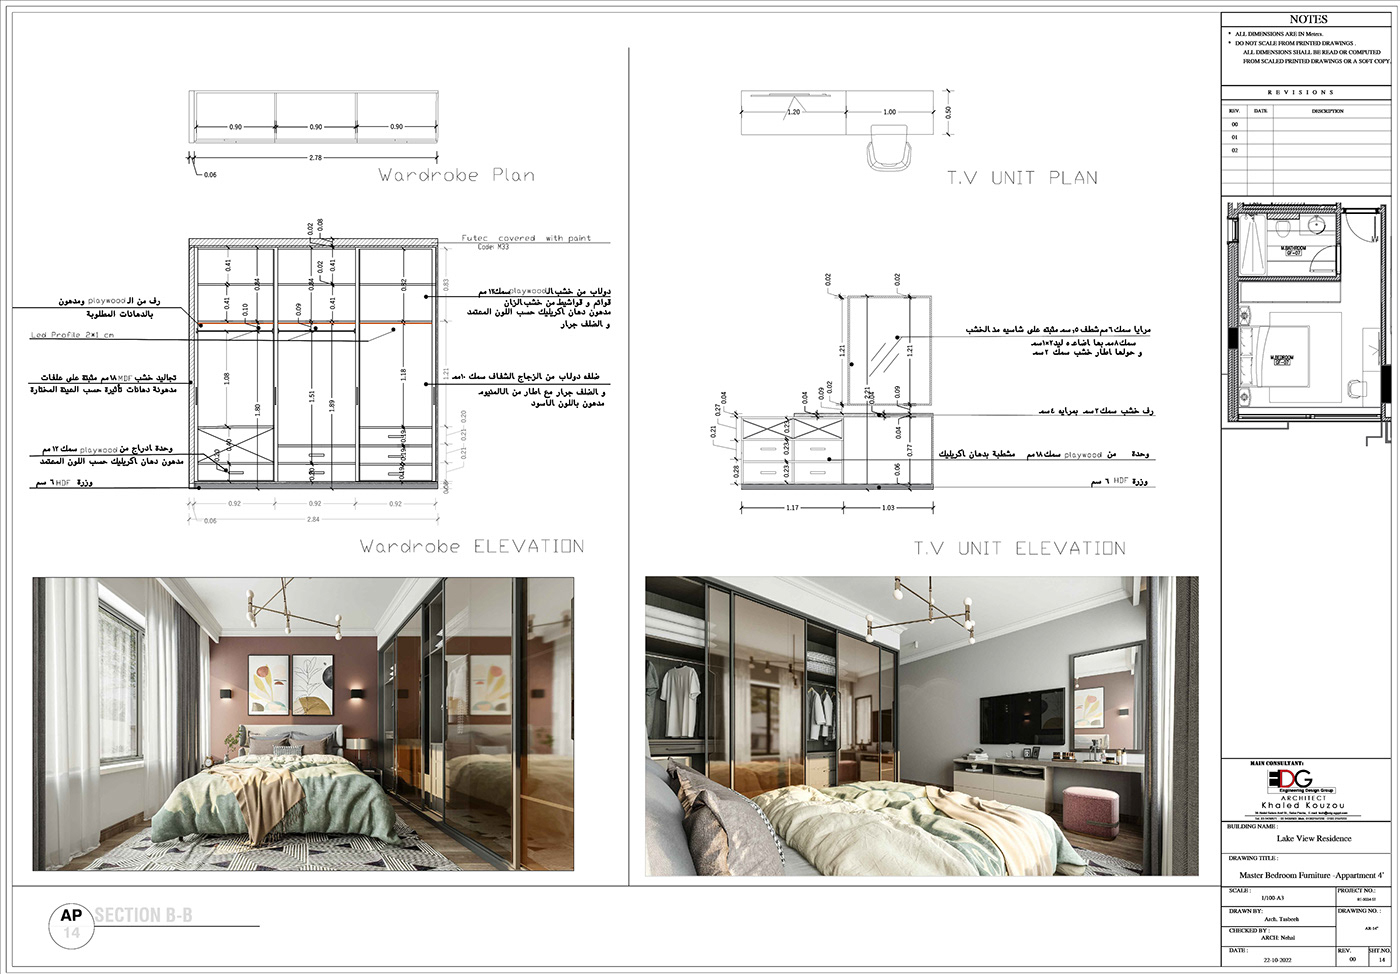 architecture details Drawing  interior design  Shopdrawings technical office engineer